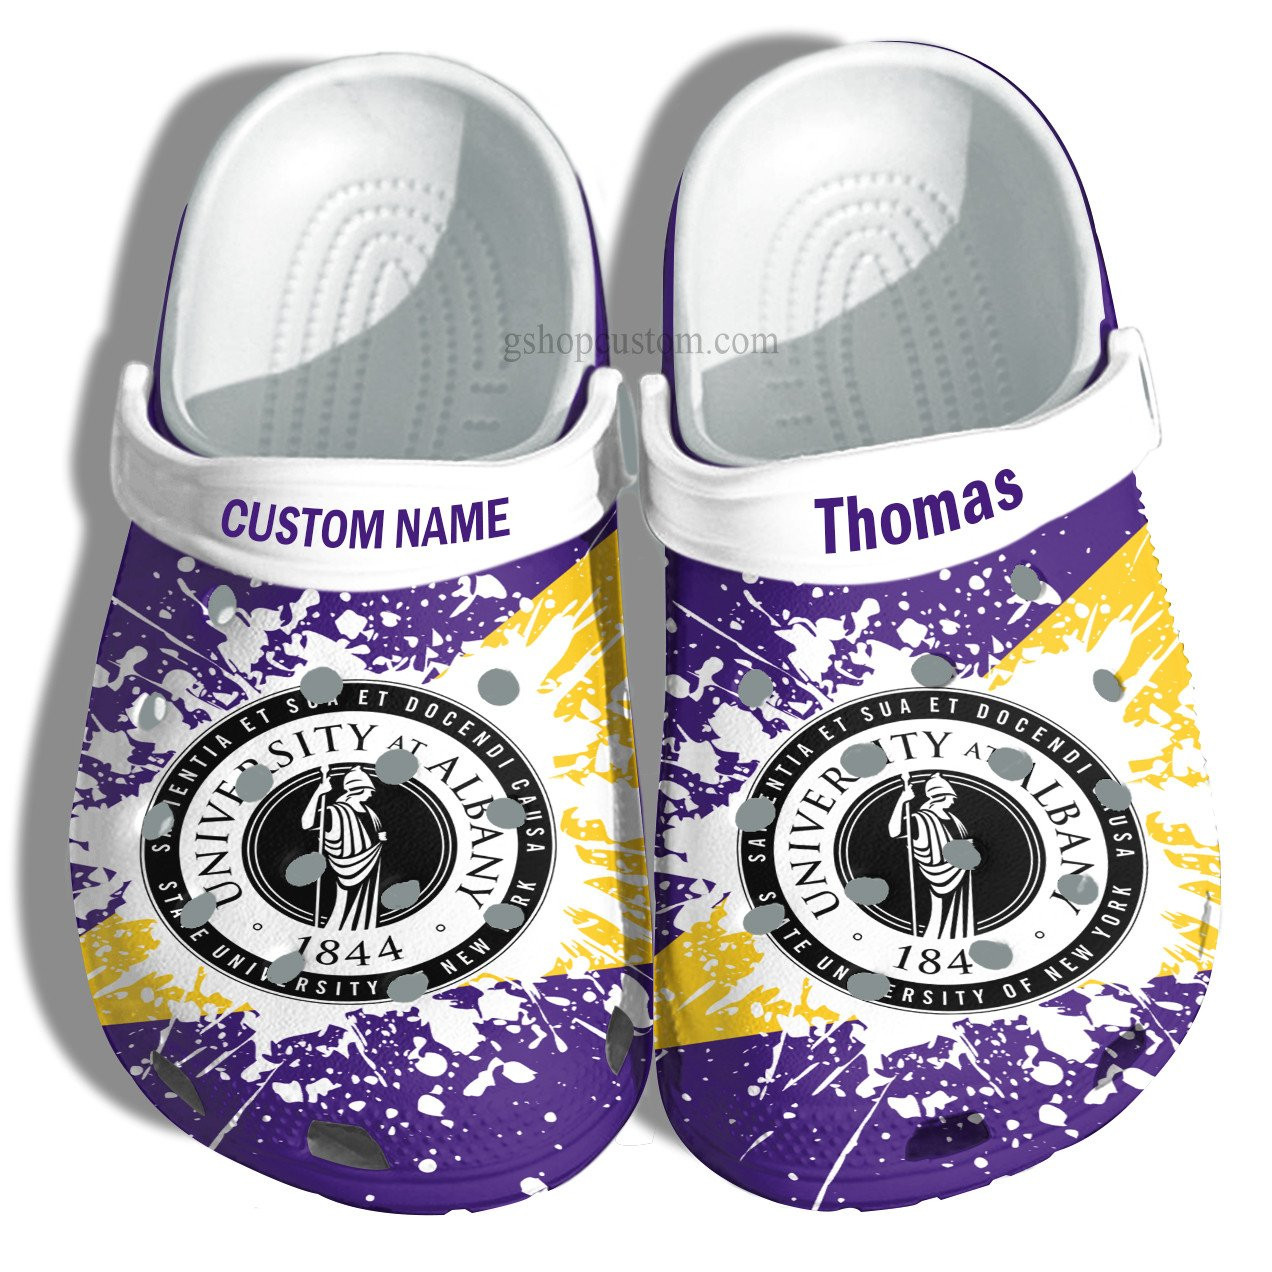 University At Albany Graduation Gifts Croc Shoes Customize- Admission Gift Crocs Shoes